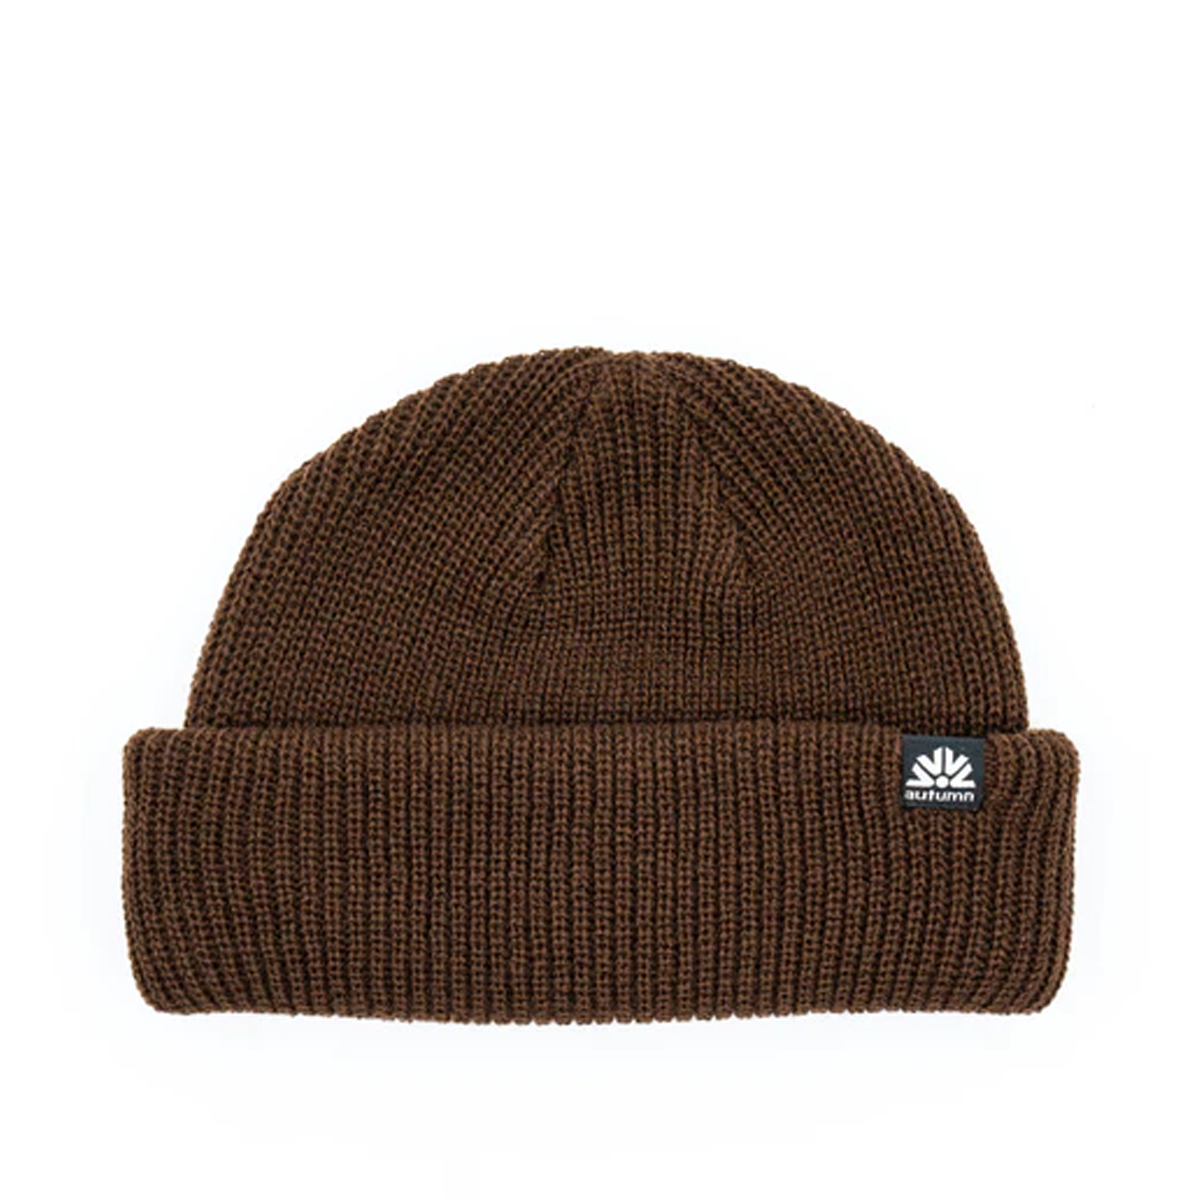 Autumn Shorty Double Roll Beanie - Assorted